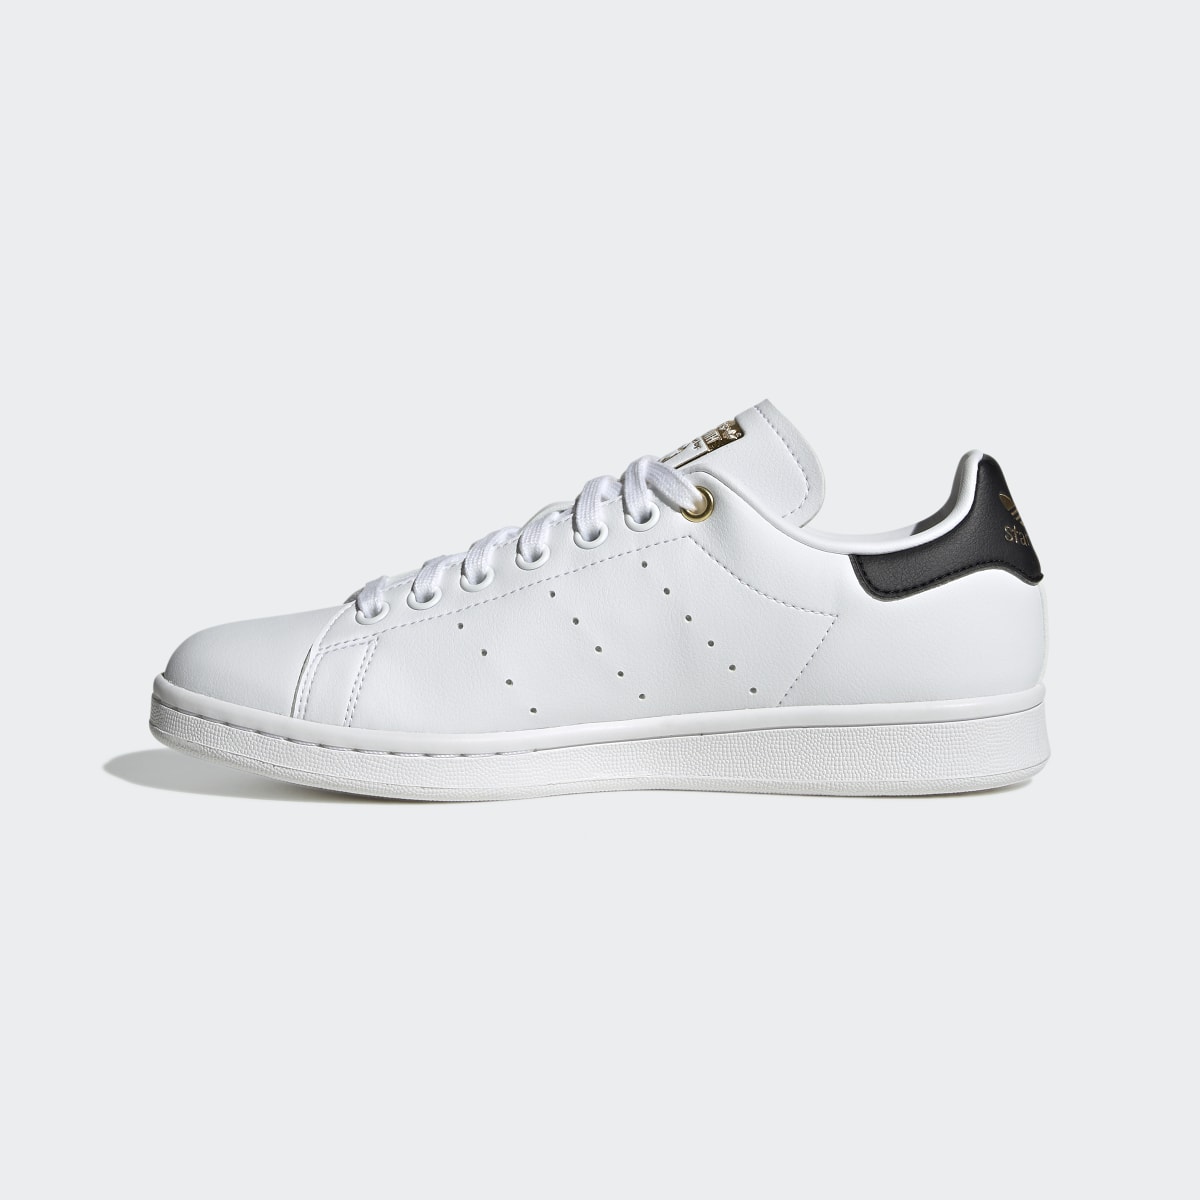 Adidas Rich Mnisi Stan Smith Shoes. 7